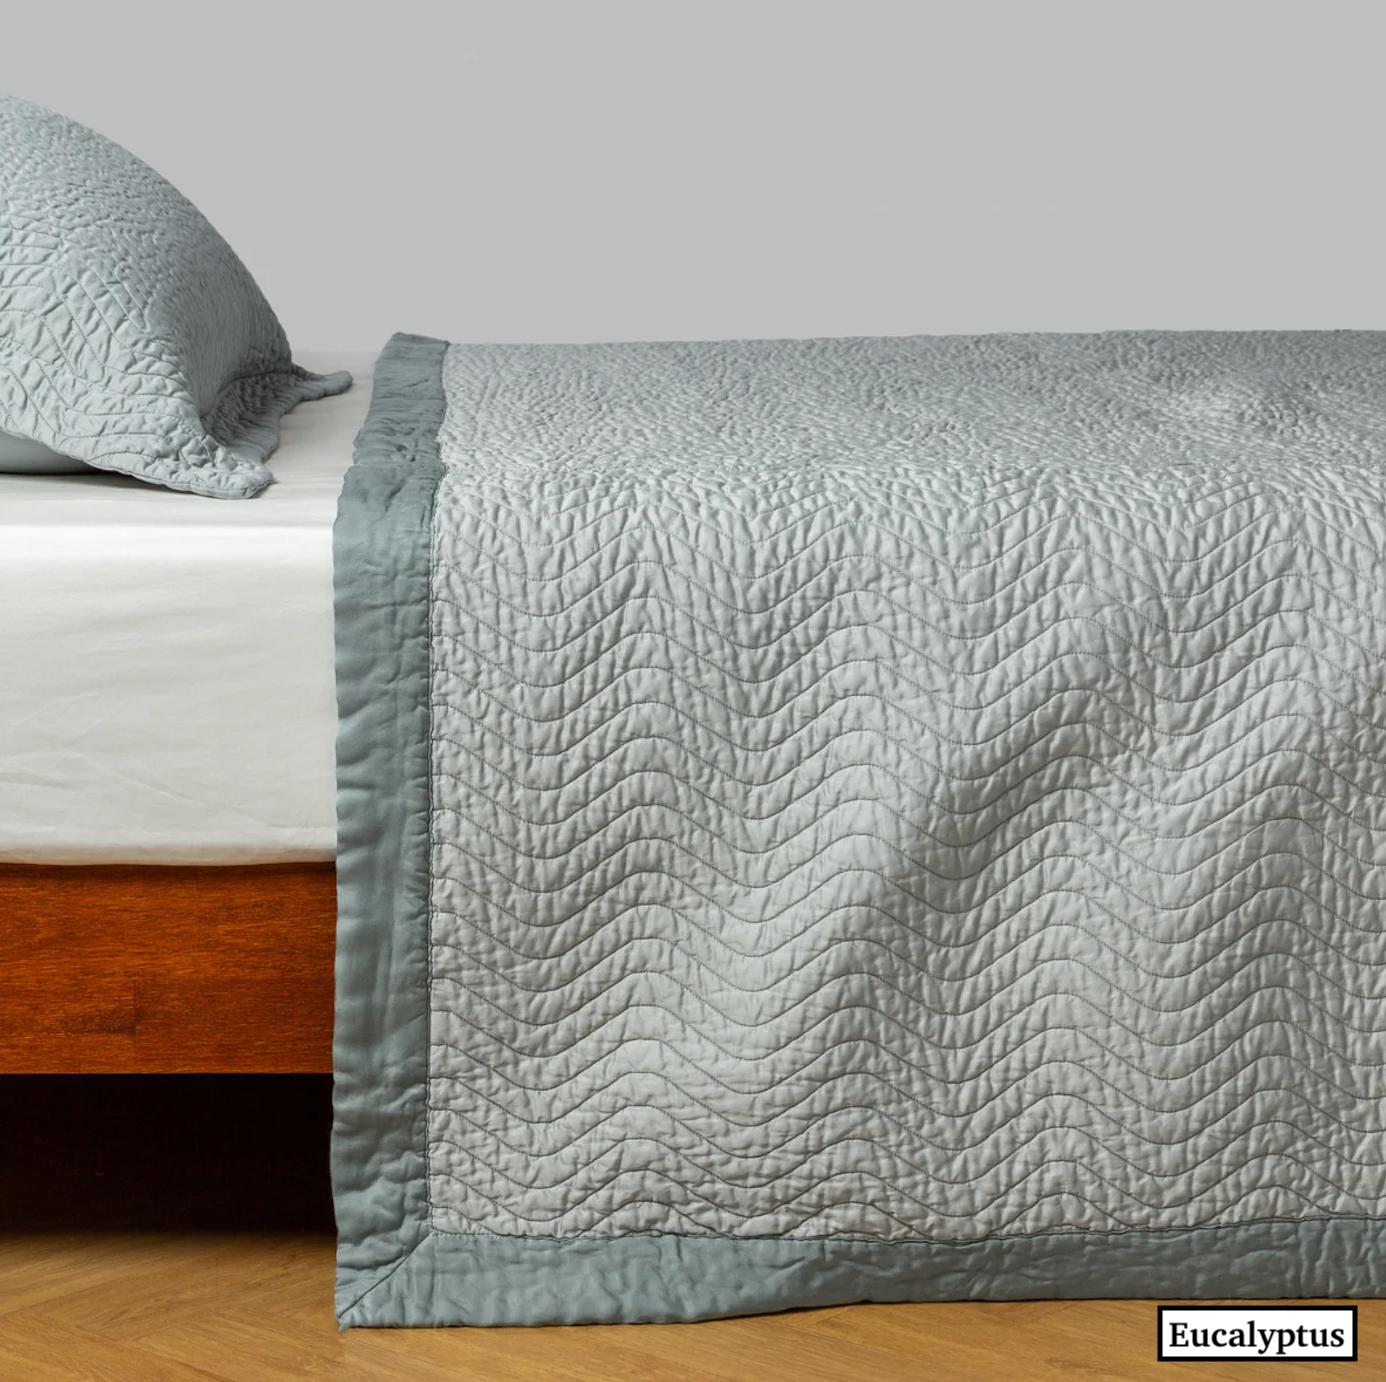 NEW Cirillo coverlets and shams by Bella Notte (**to order)